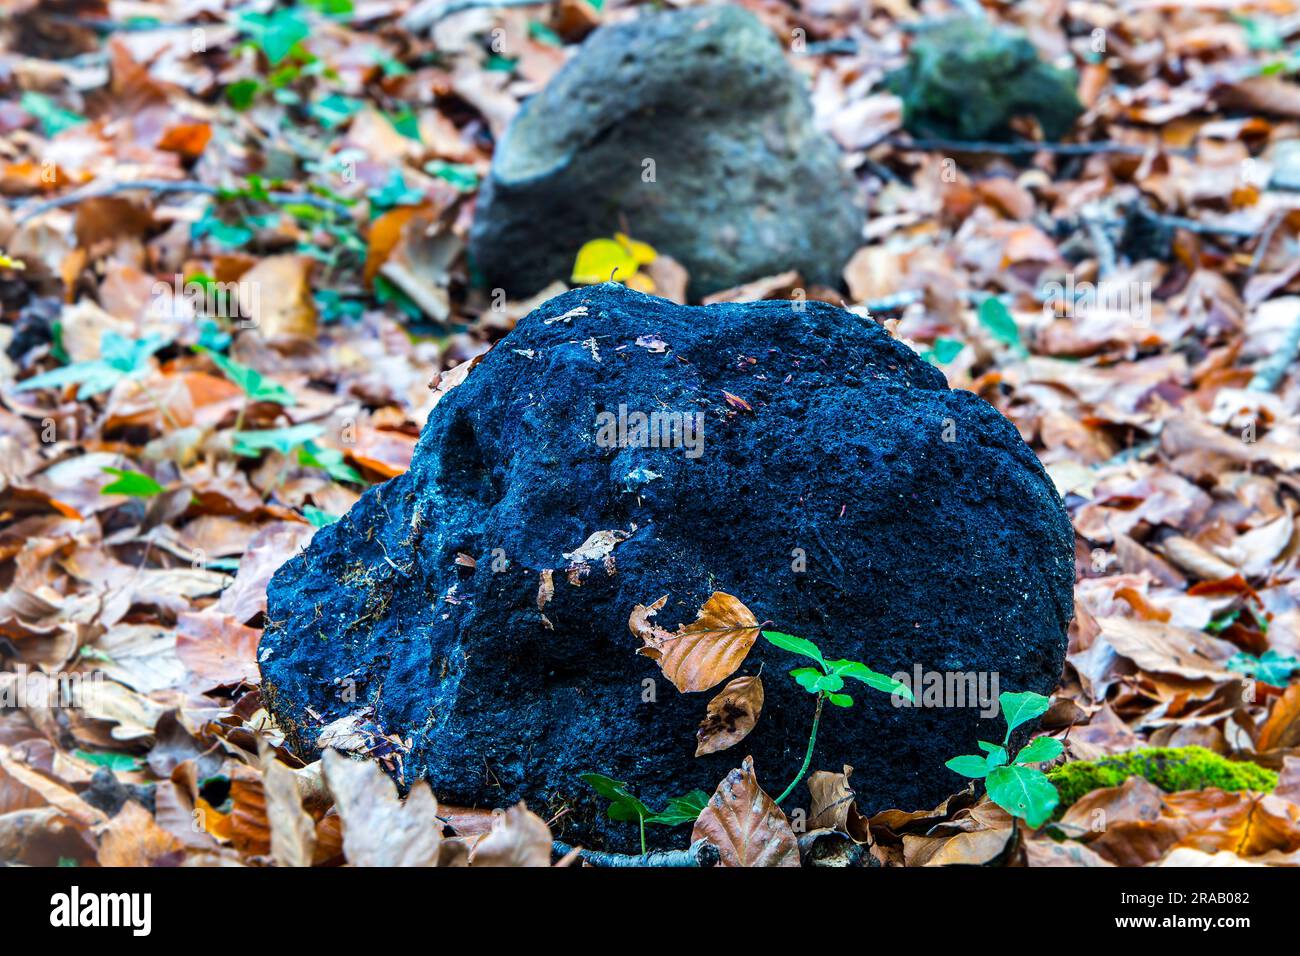 Close up view of a volcanic rock with bluish hue Stock Photo